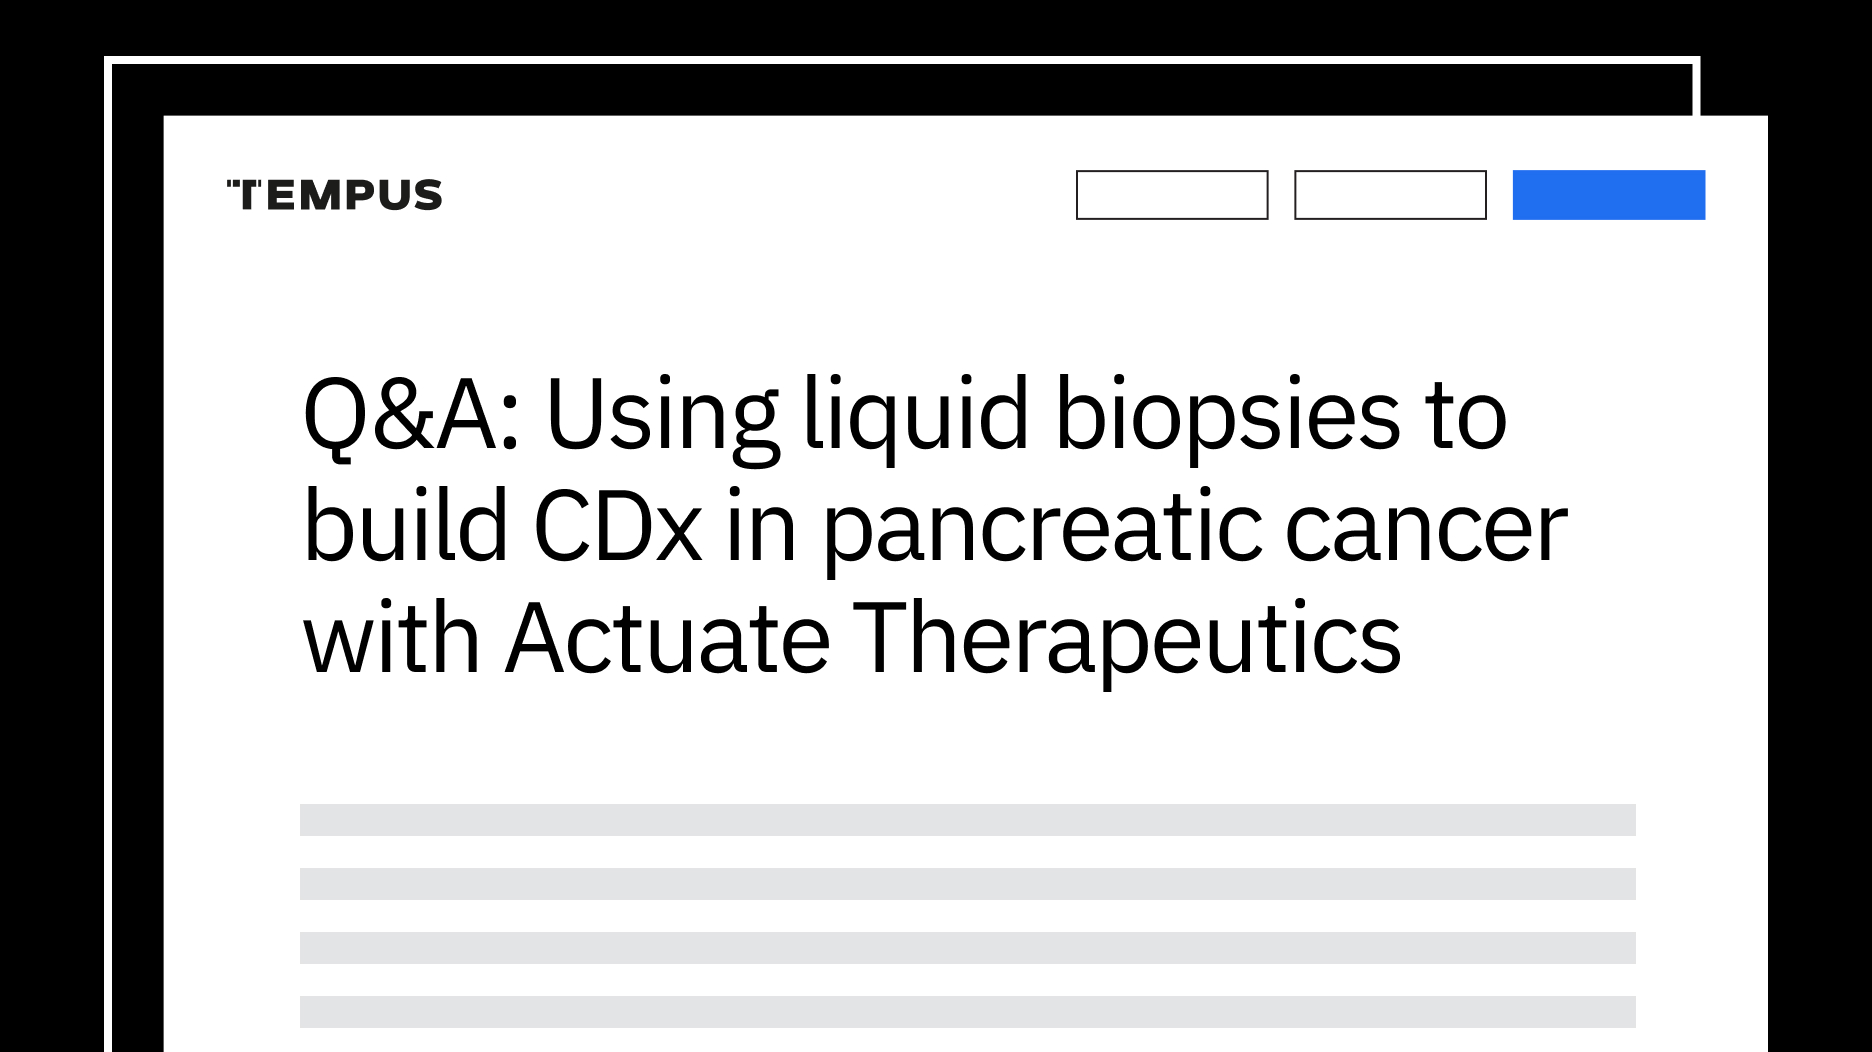 Q&A: Using liquid biopsies  to build CDx in pancreatic cancer with Actuate Therapeutics